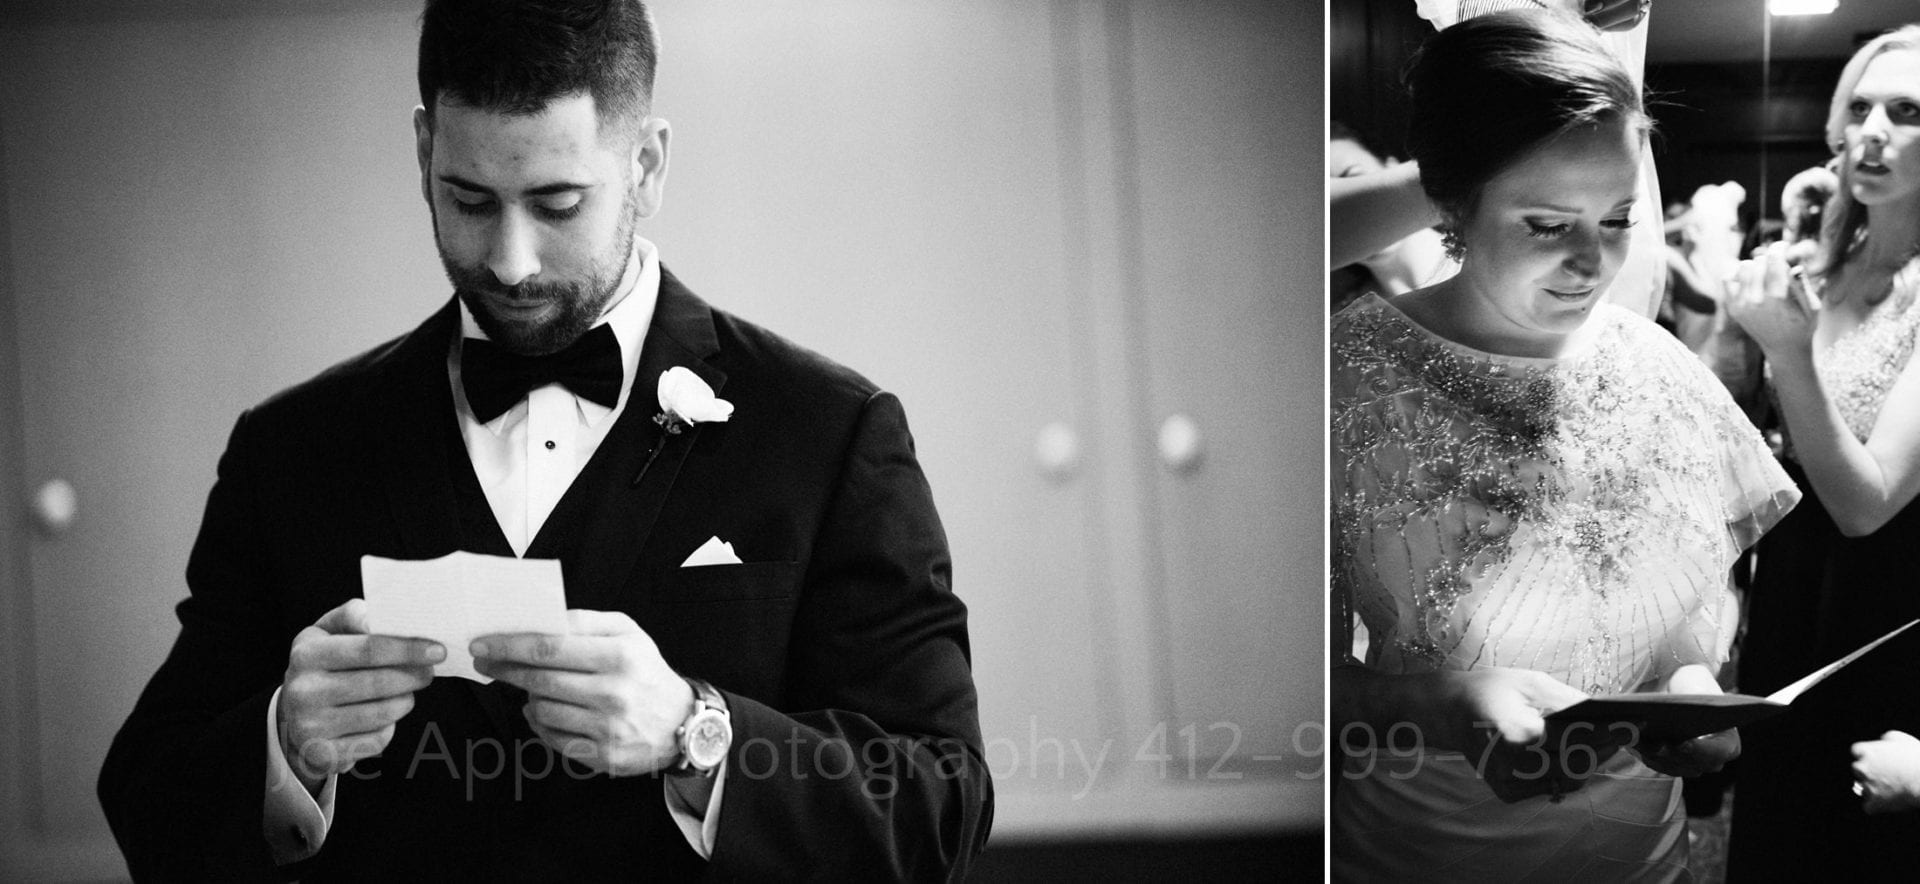 Two photos: In each of the photos the bride and groom read notes that they wrote to one another.